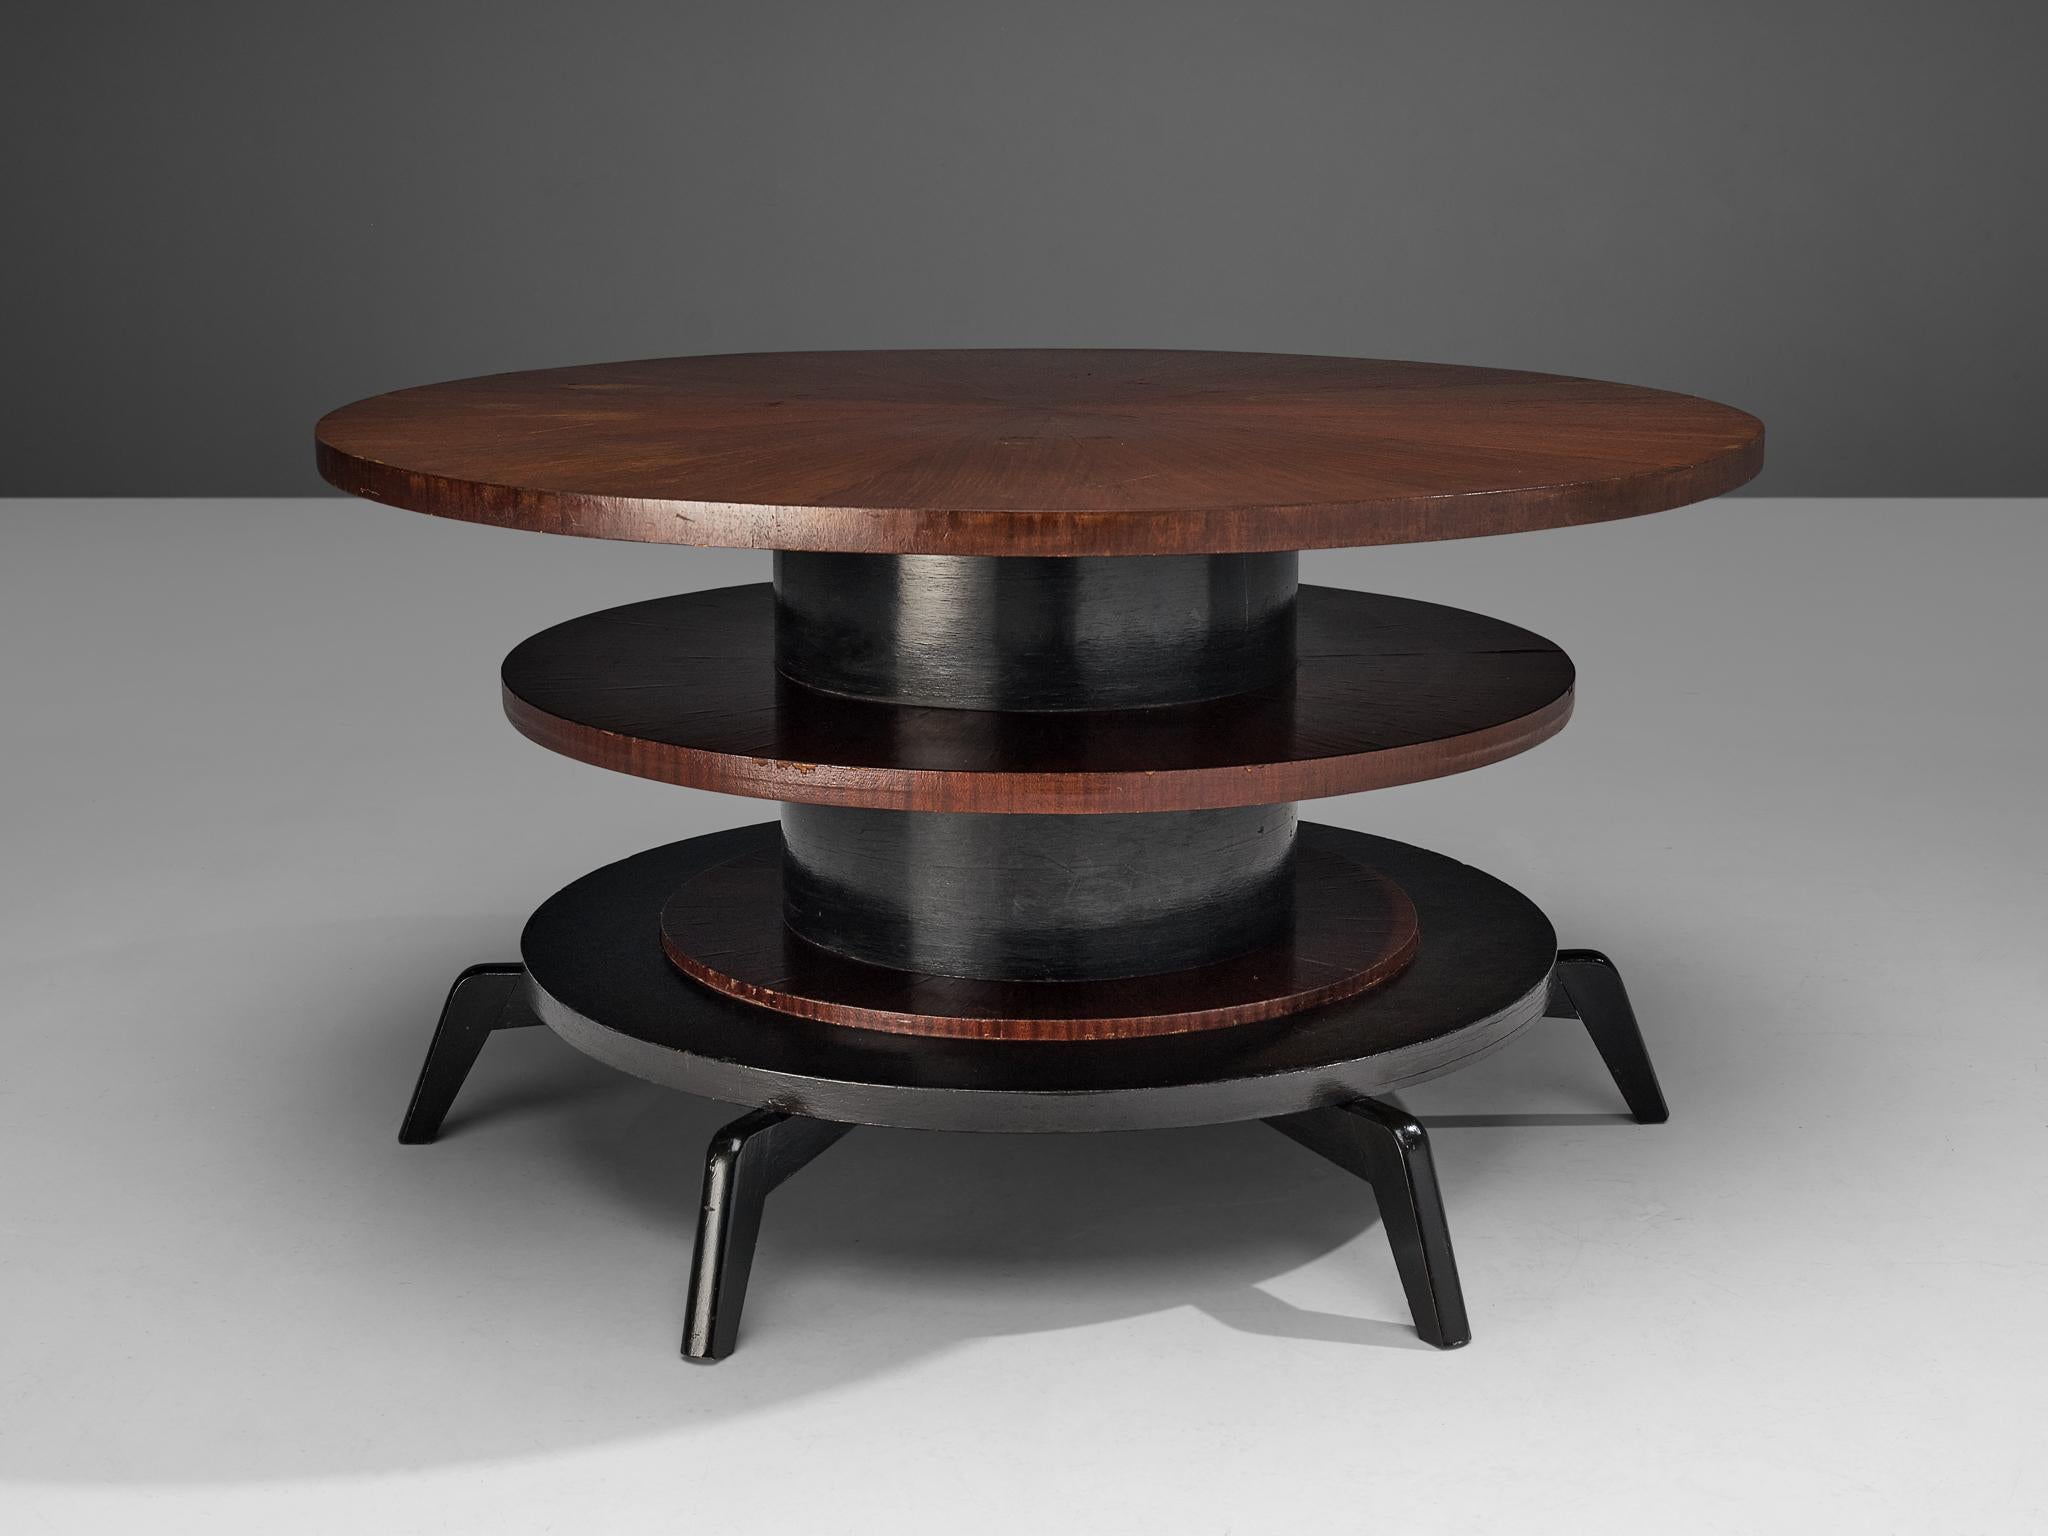 Center table, mahogany, lacquered mahogany, Italy, 1960s

Multi-layered center table with modernist look. The table has a sculptural, yet open look which is achieved by the different layers and angled legs. Although the table has a structural feel,